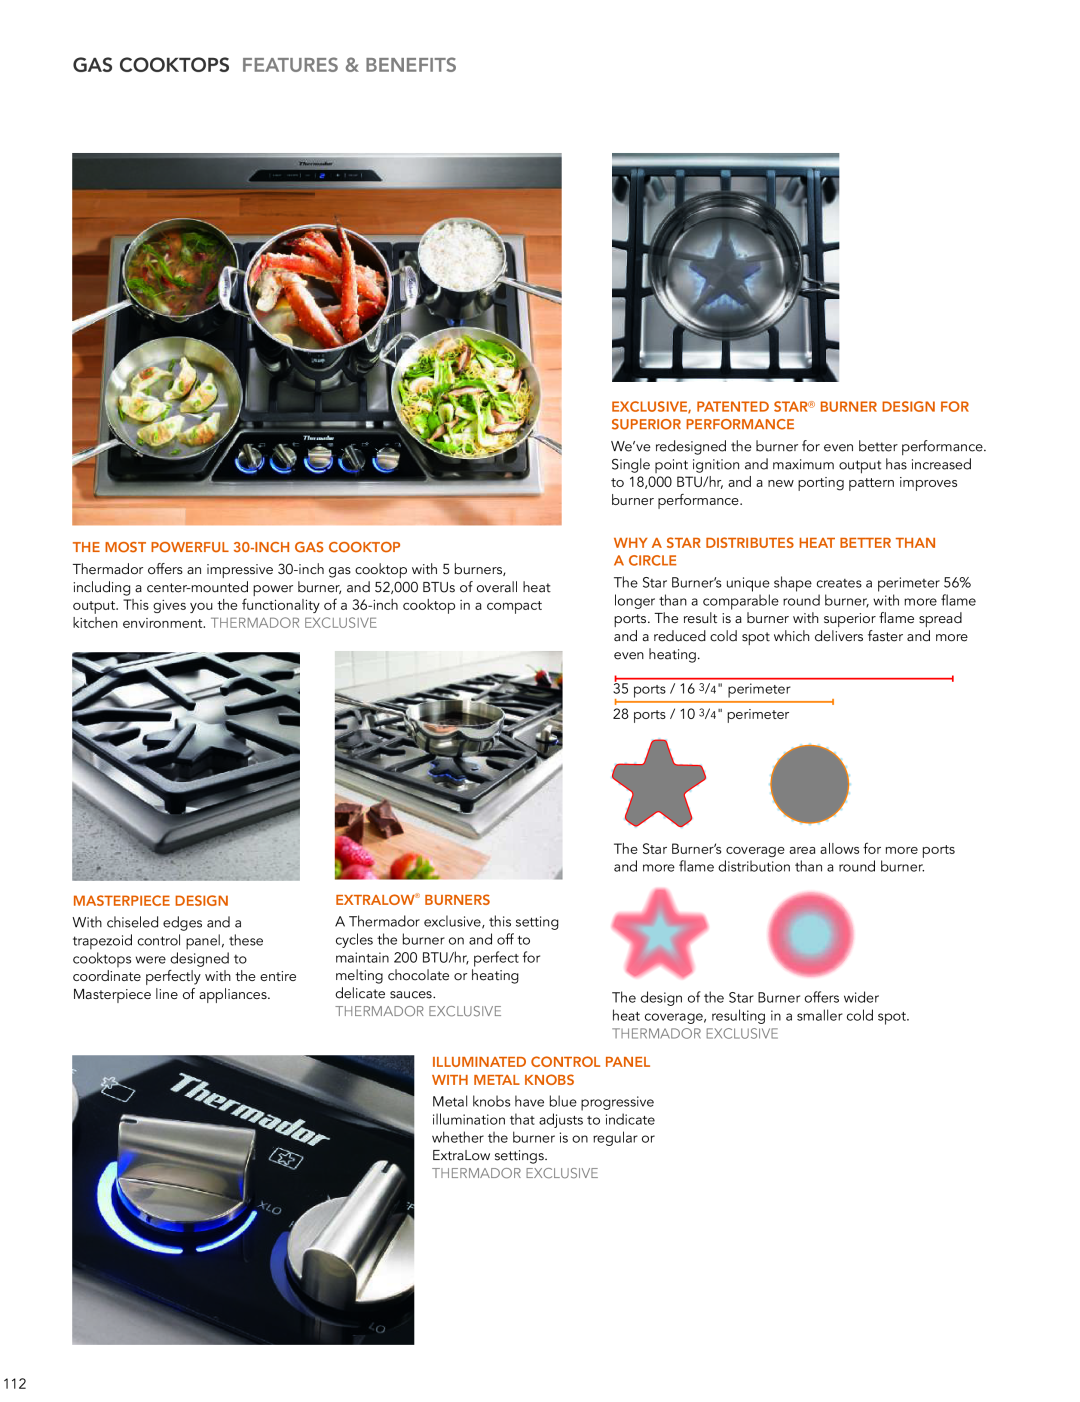 Thermador SGSX365FS manual GAS COOKTOPS FeATUreS & BeNeFITS, The MOST POWerFUL 30-INChGAS COOKTOP, MASTerPIeCe DeSIGN 